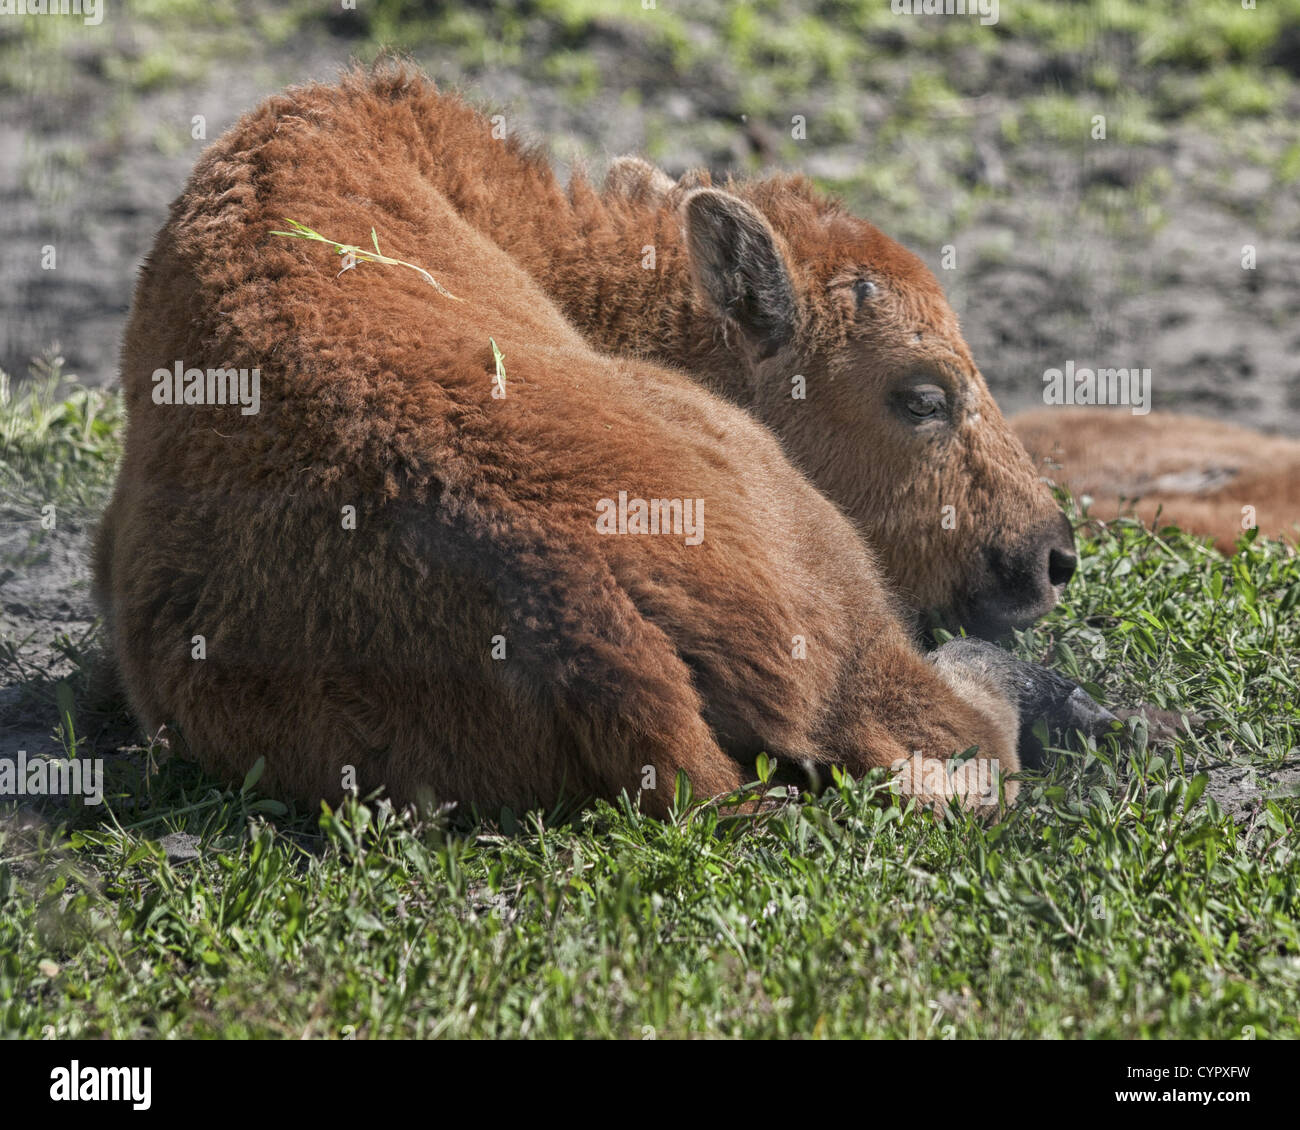 June 29, 2012 - Girdwood, Alaska, US - A wood bison calf. The wood bison  (Bison bison athabascae), a threatened species, is the largest land animal  in North America and the northern